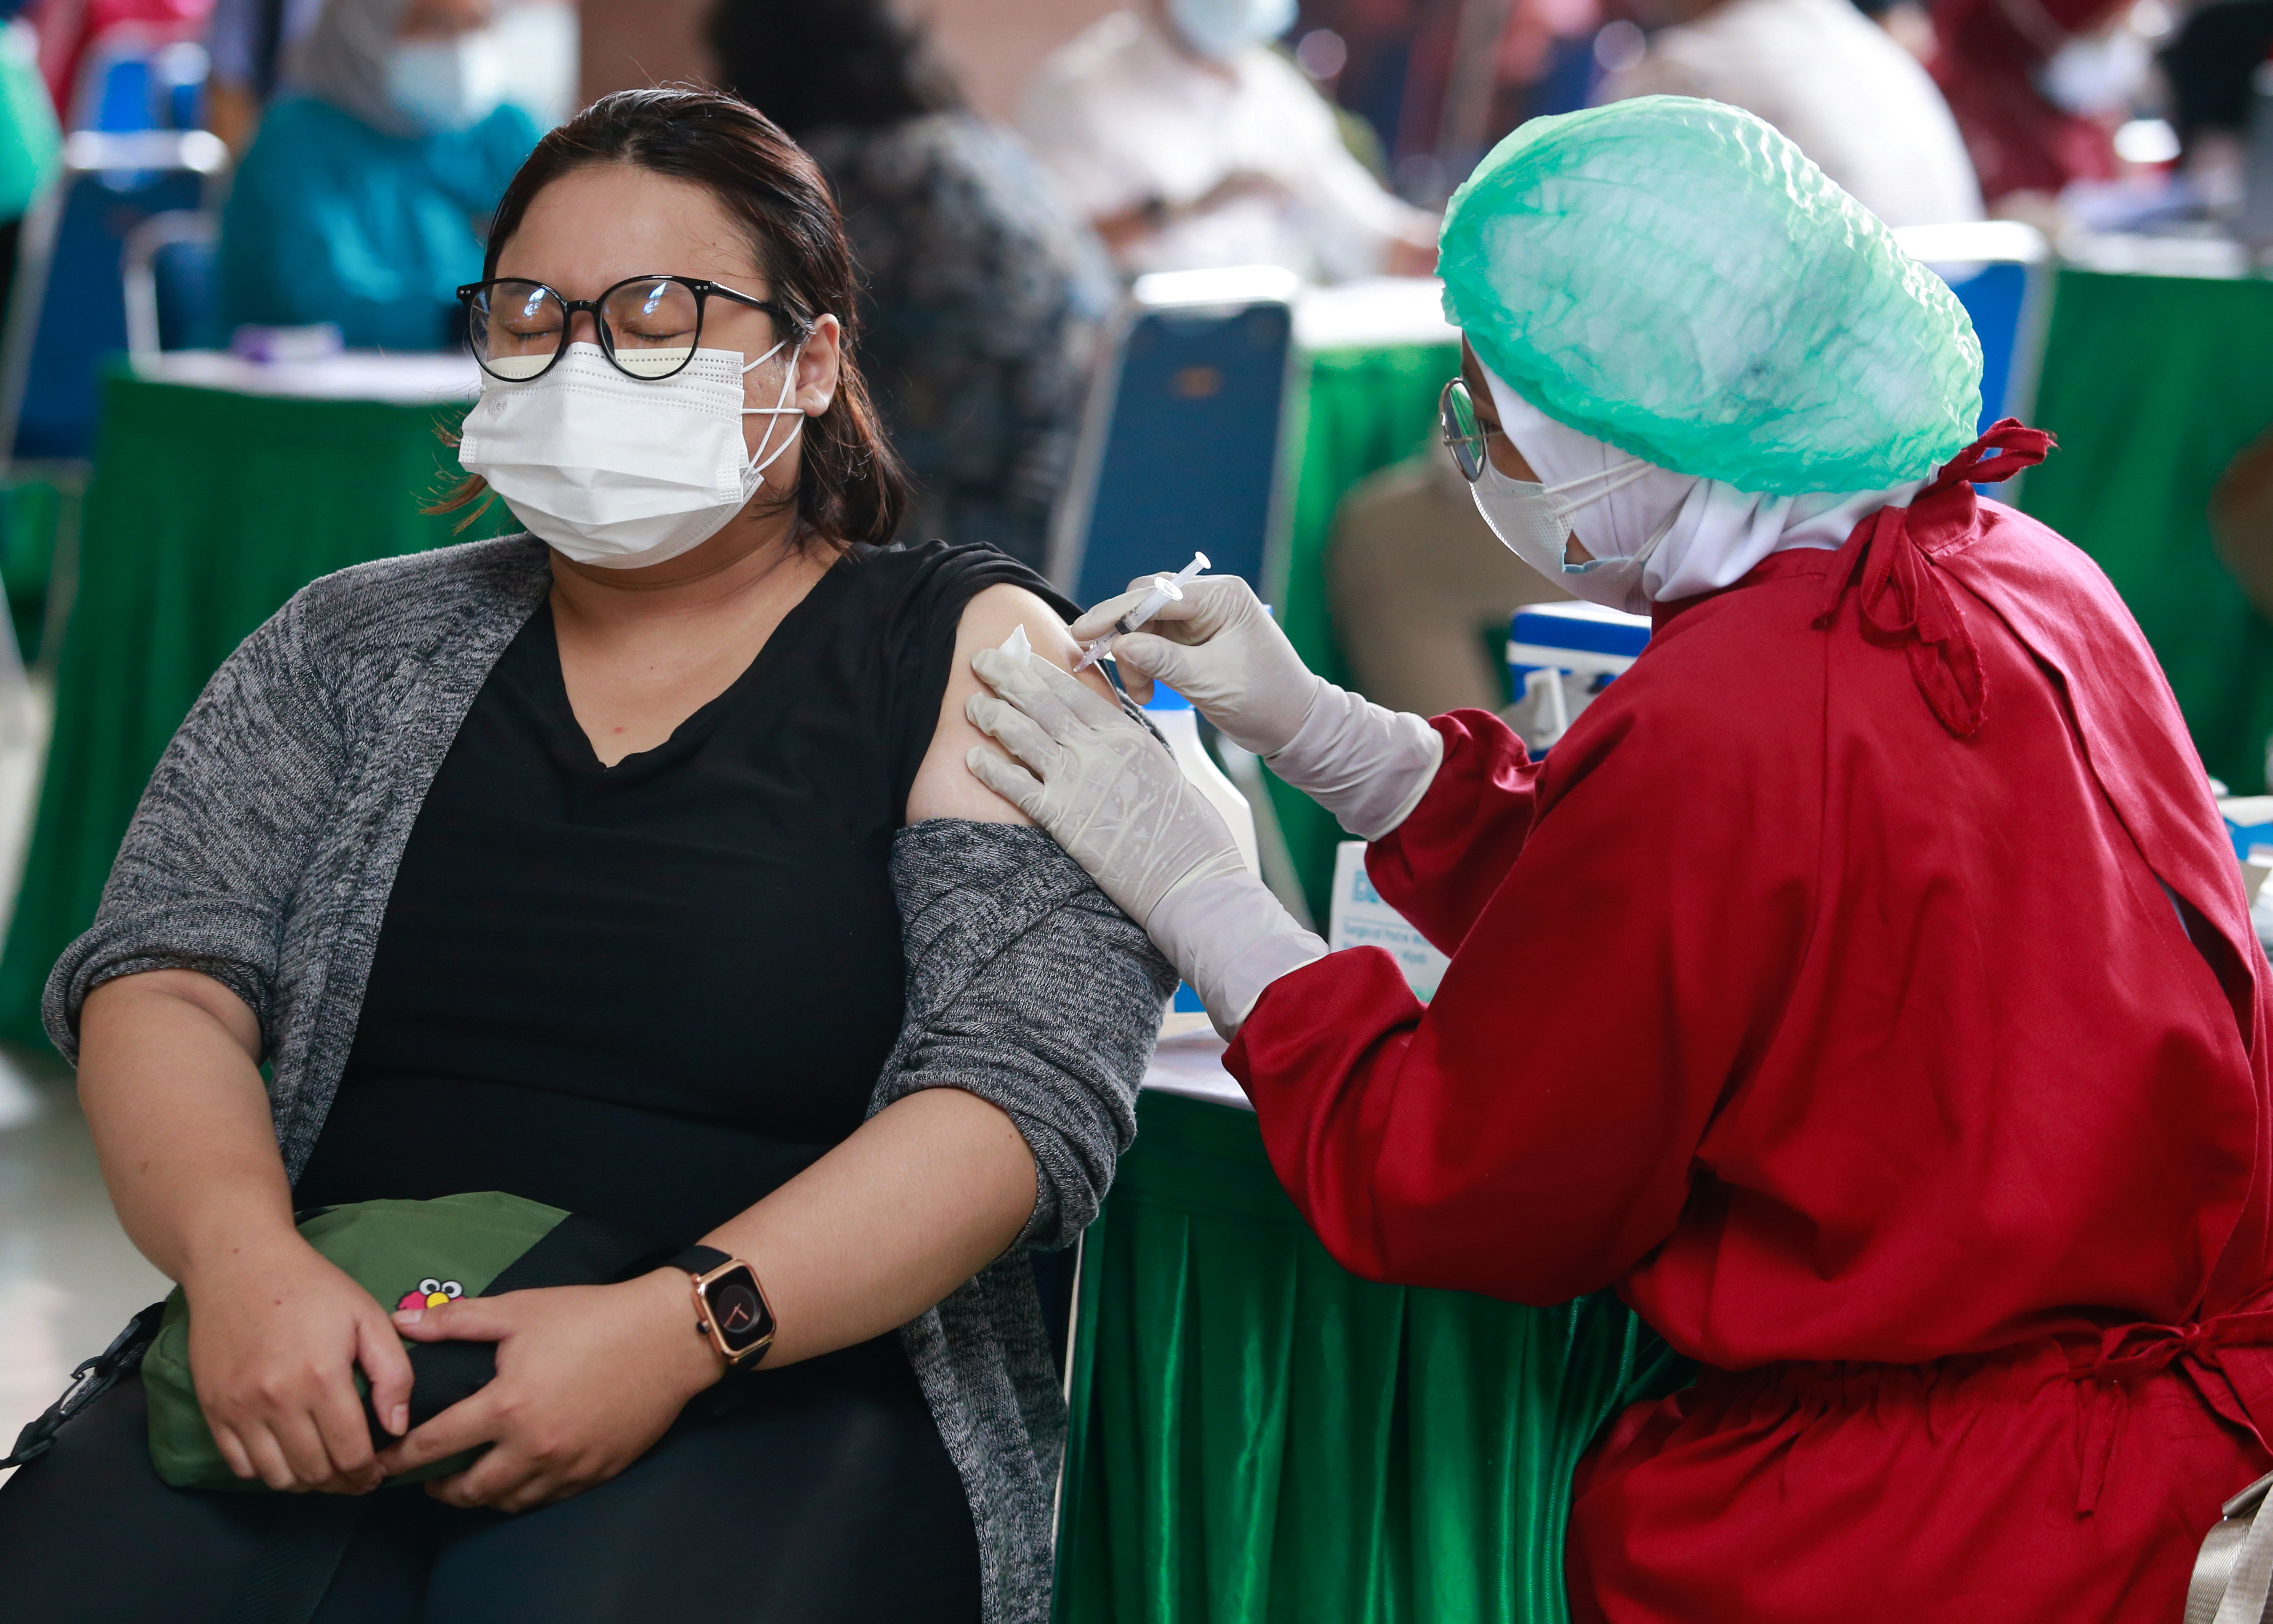 A woman reacts as she receives a dose of the coronavirus disease (COVID-19) vaccine during the mass vaccination program at the Tangerang City Government Center, in Tangerang on the outskirts of Jakarta, Indonesia, June 30, 2021. REUTERS/Ajeng Dinar Ulfiana